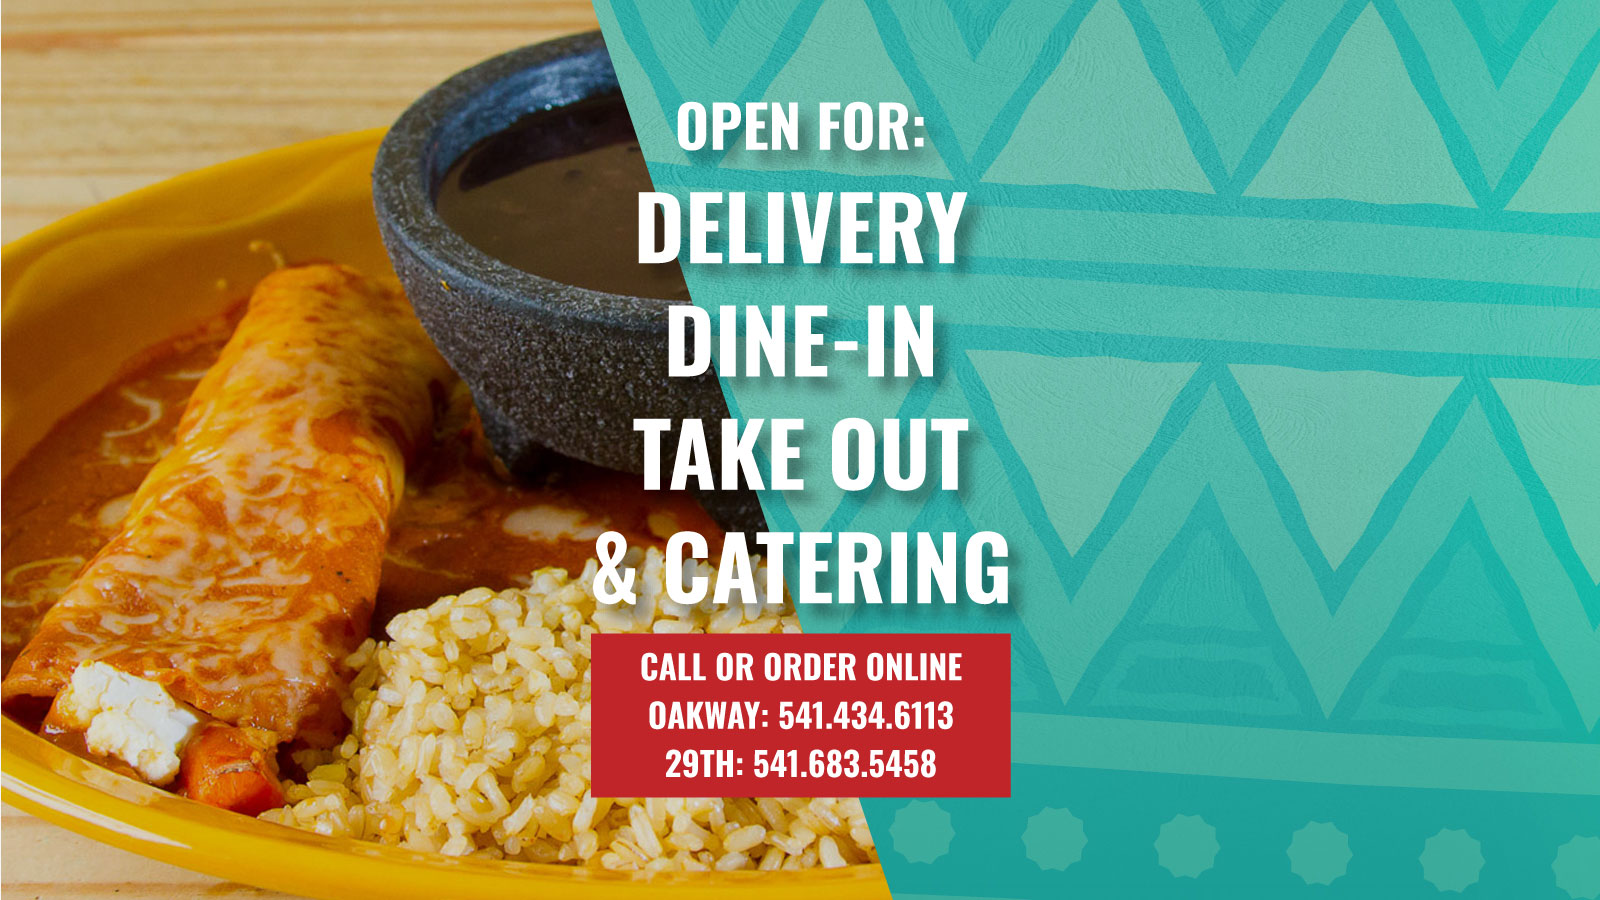 Restaurant – Catering – Takeout – Online Ordering – Authentic